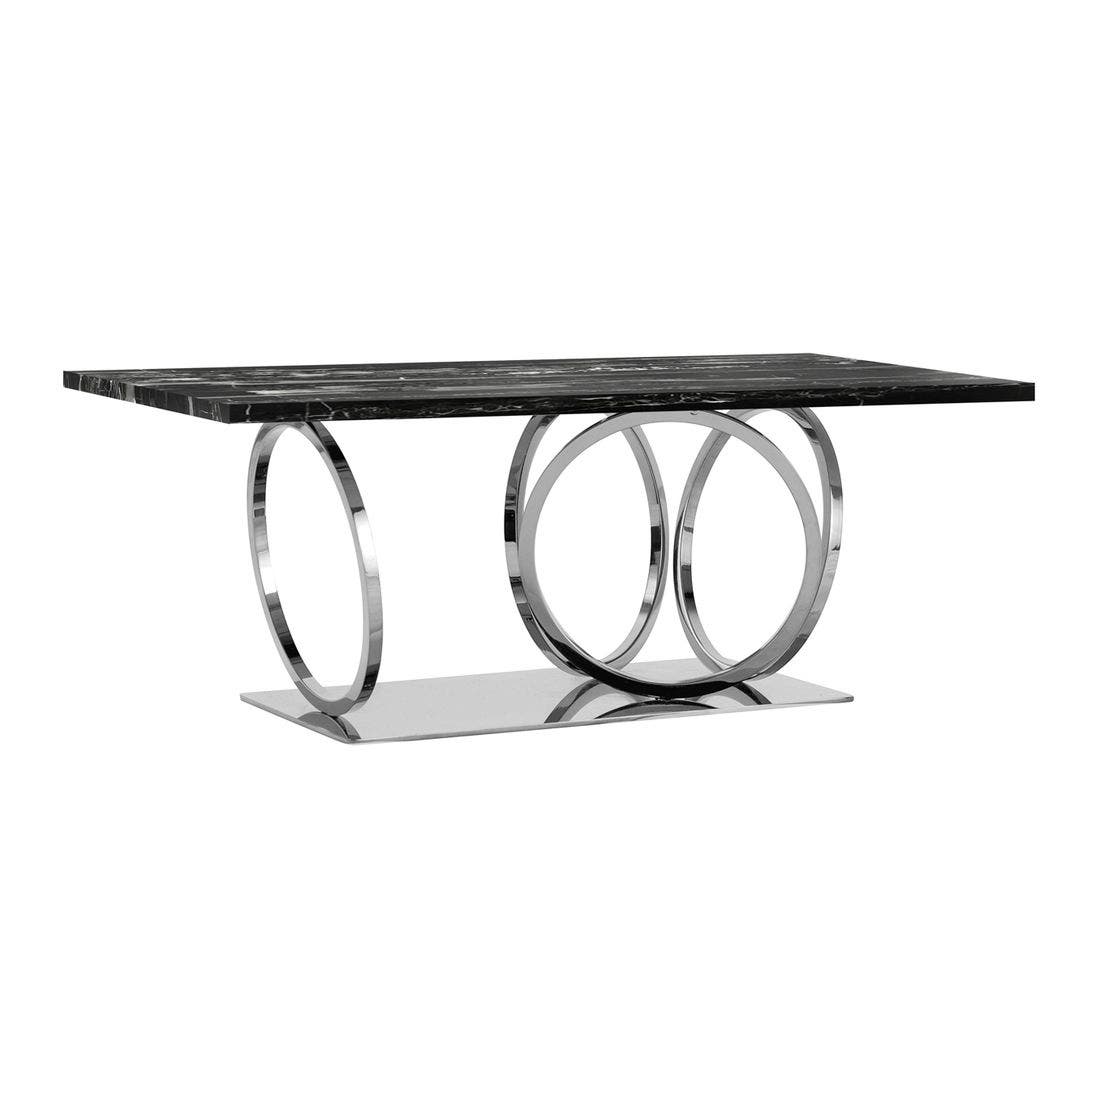 59021660-base-sb04-s-furniture-dining-room-dining-tables-01